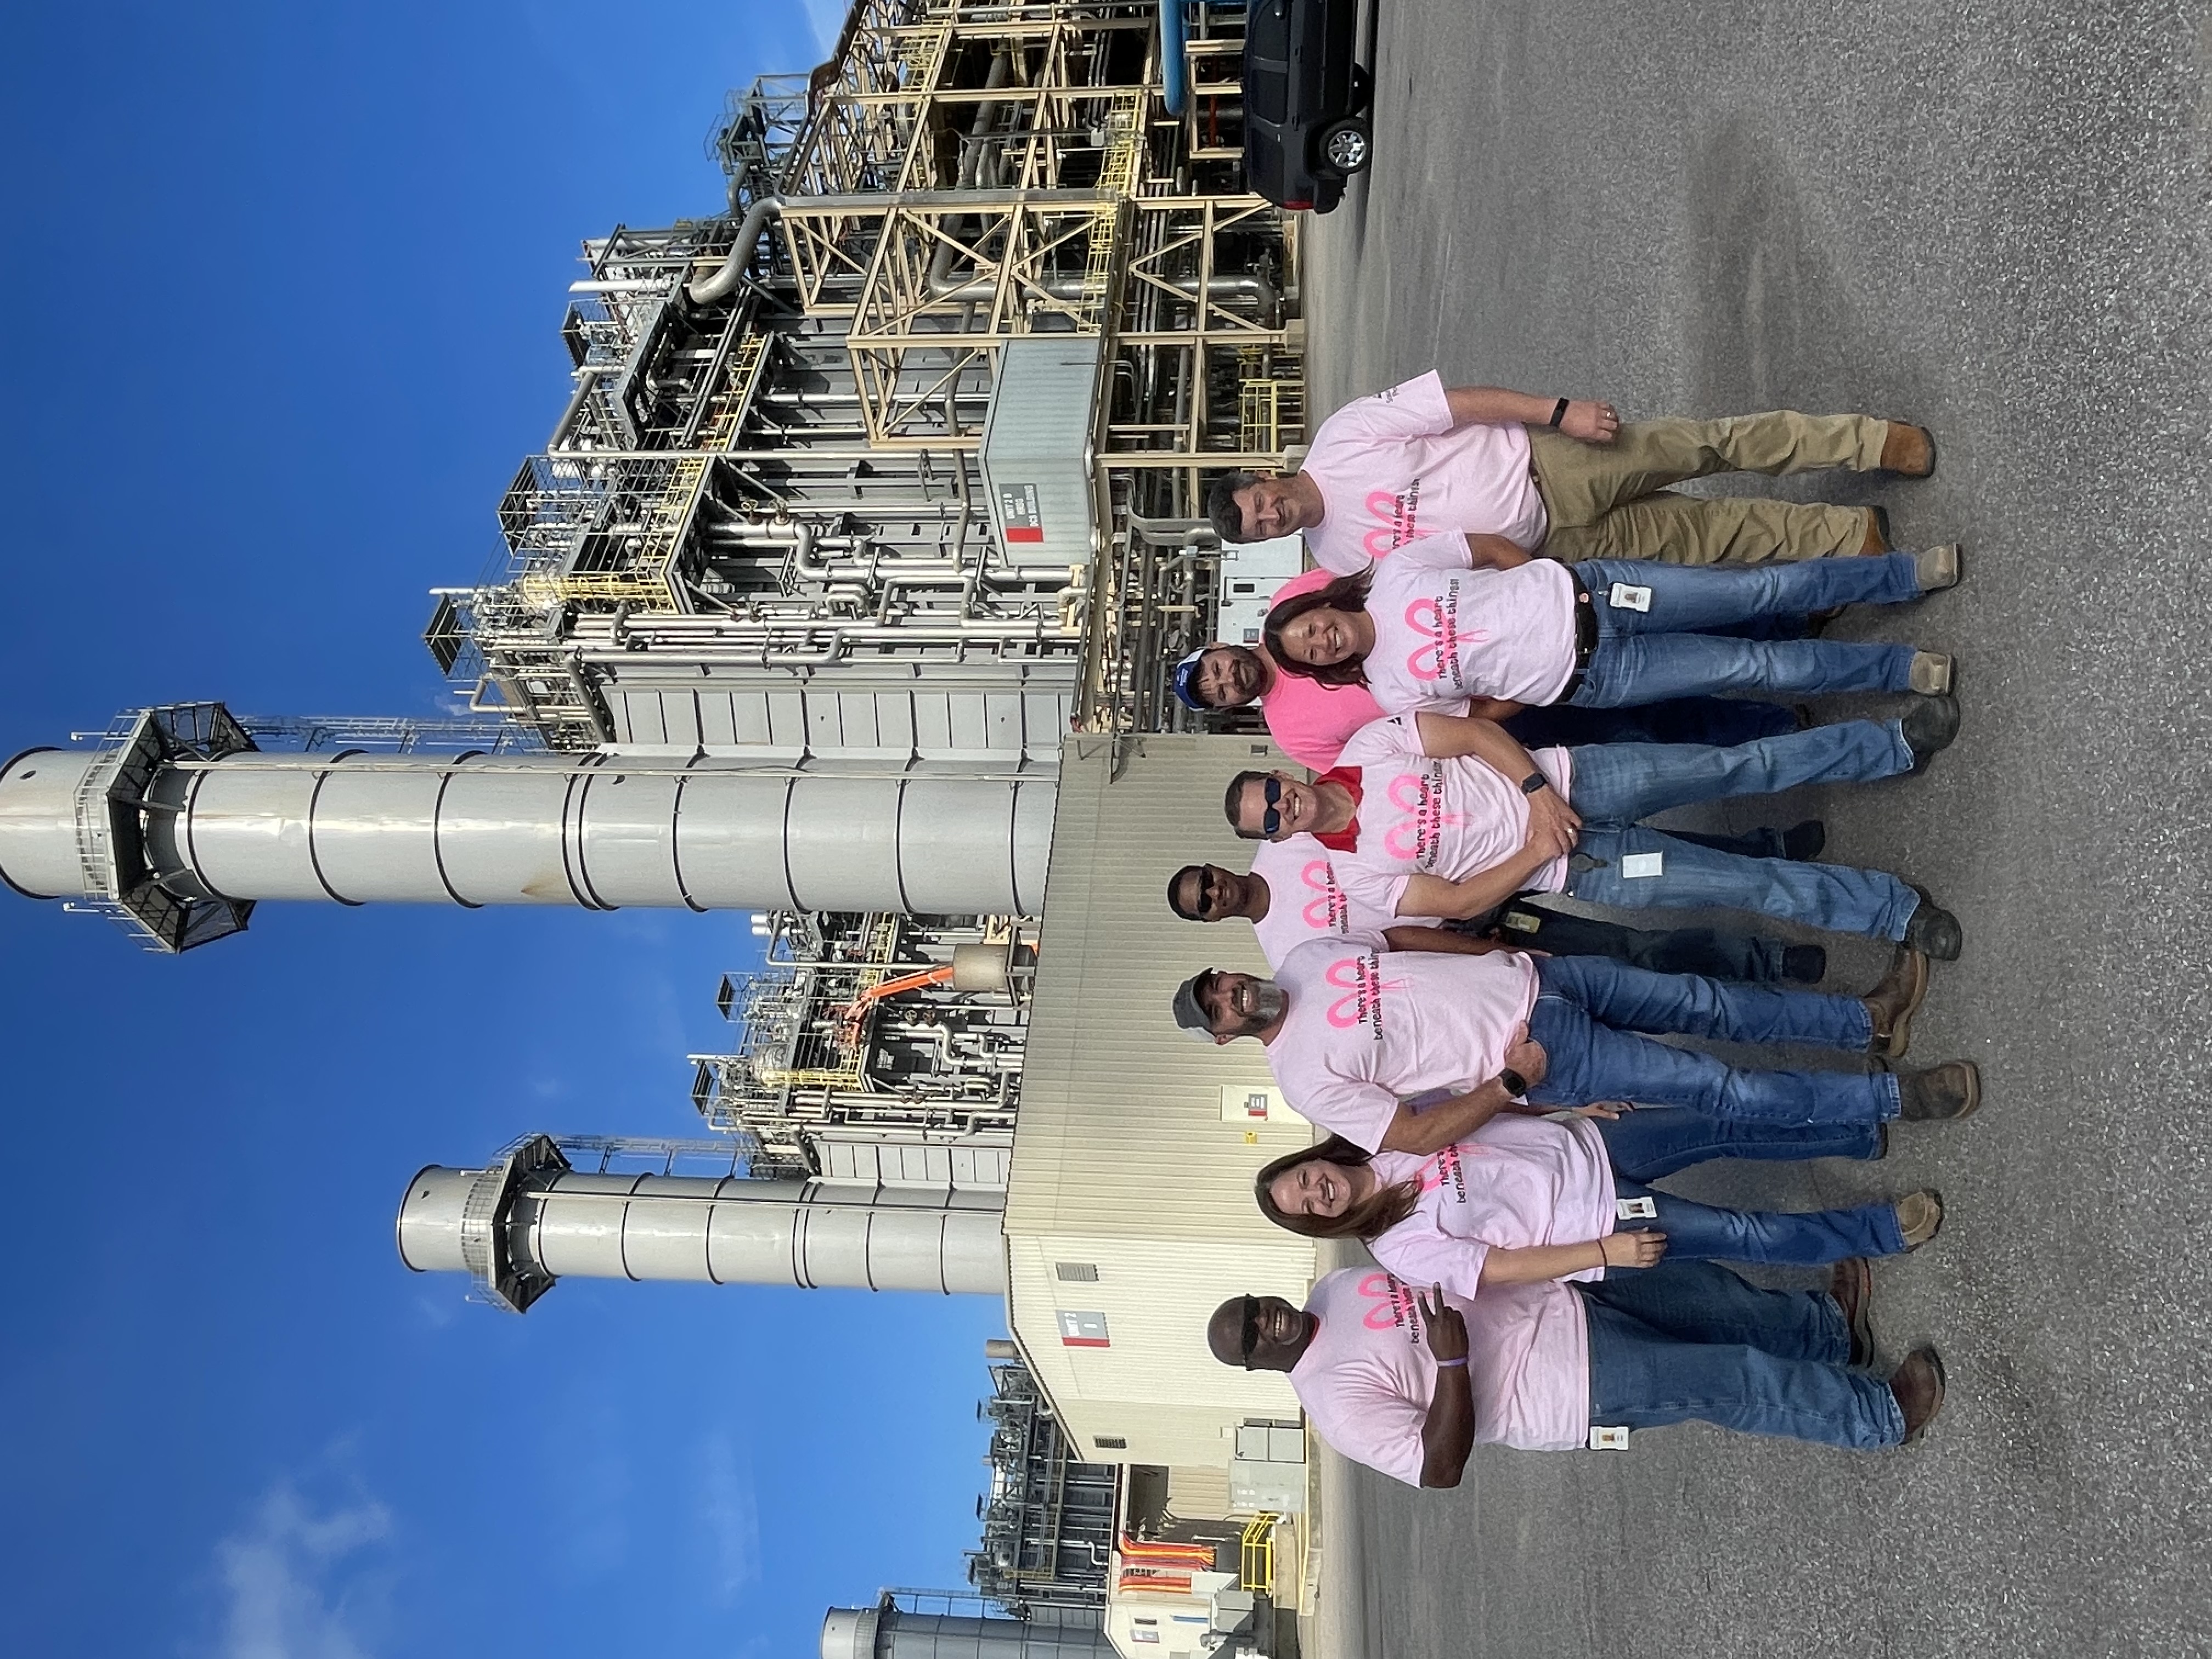 "We all are affected by Breast Cancer or other types of cancer in our lifetimes whether it be ourselves or close family and friends. We all want to spread awareness and offer support to this cause. "-Joe Drumm, Budget Analyst - Southern Power Plant Franklin